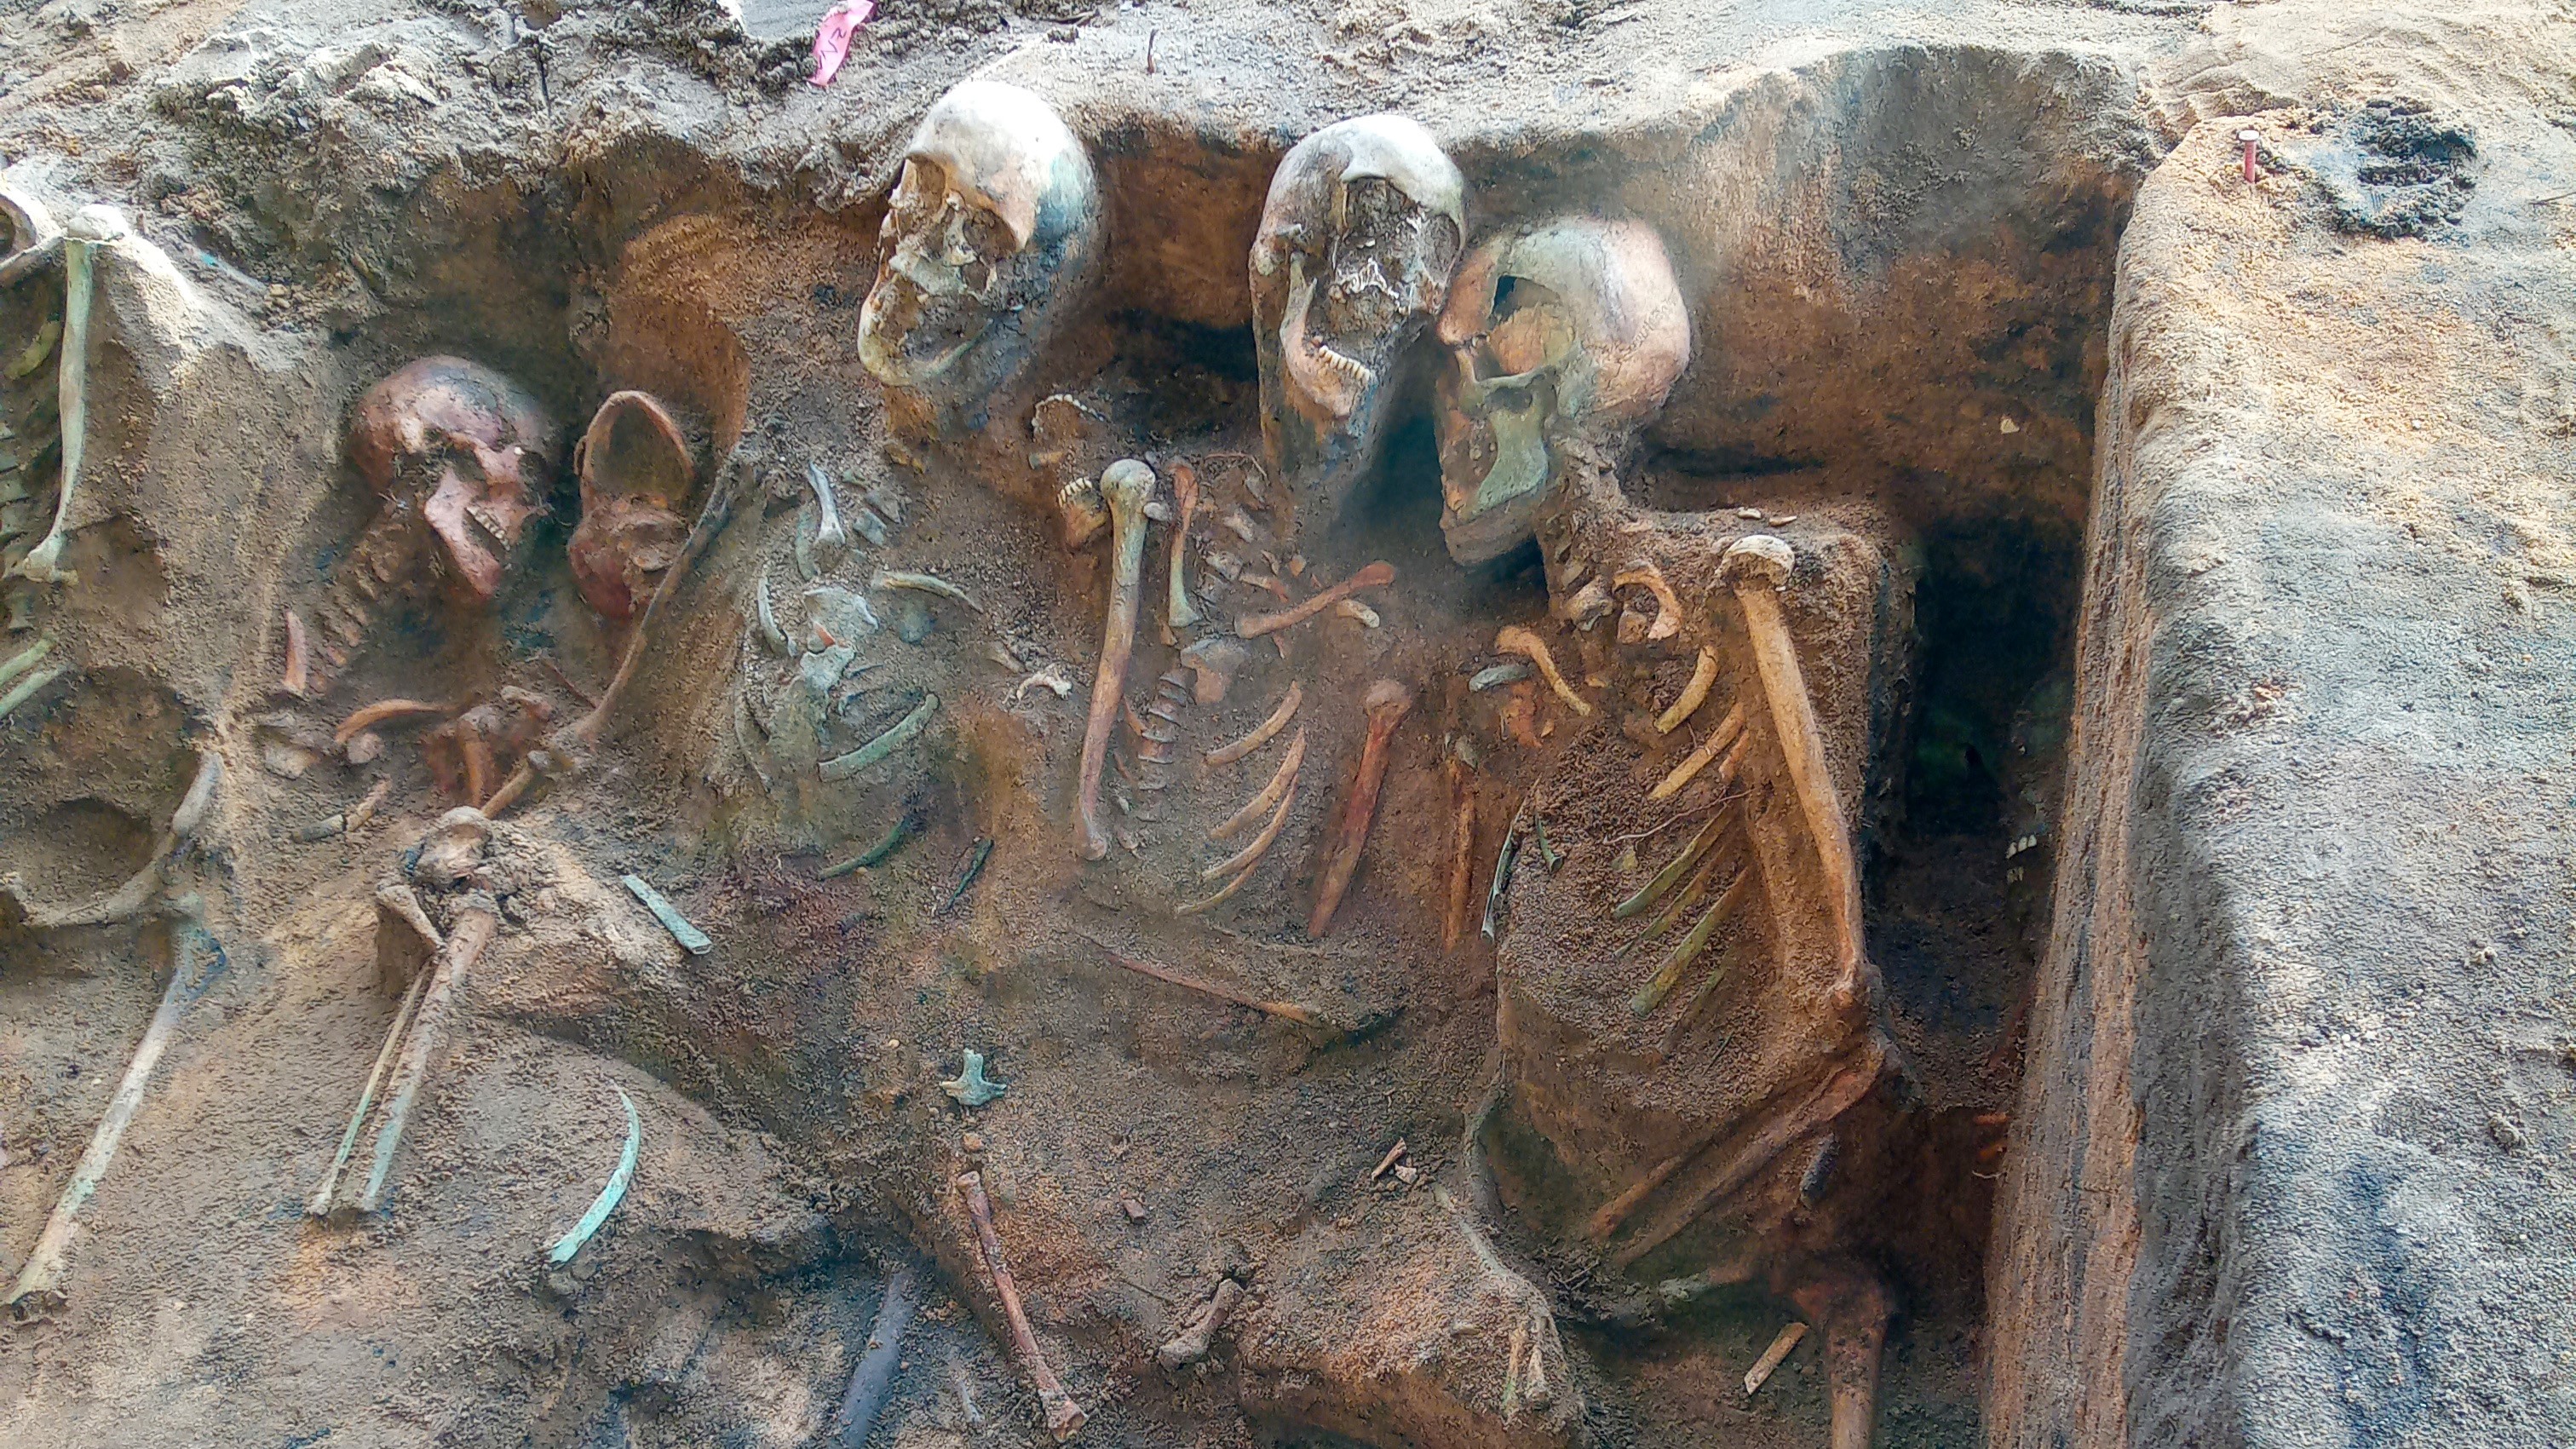 A close up of skeletons packed closely together in a seated position.